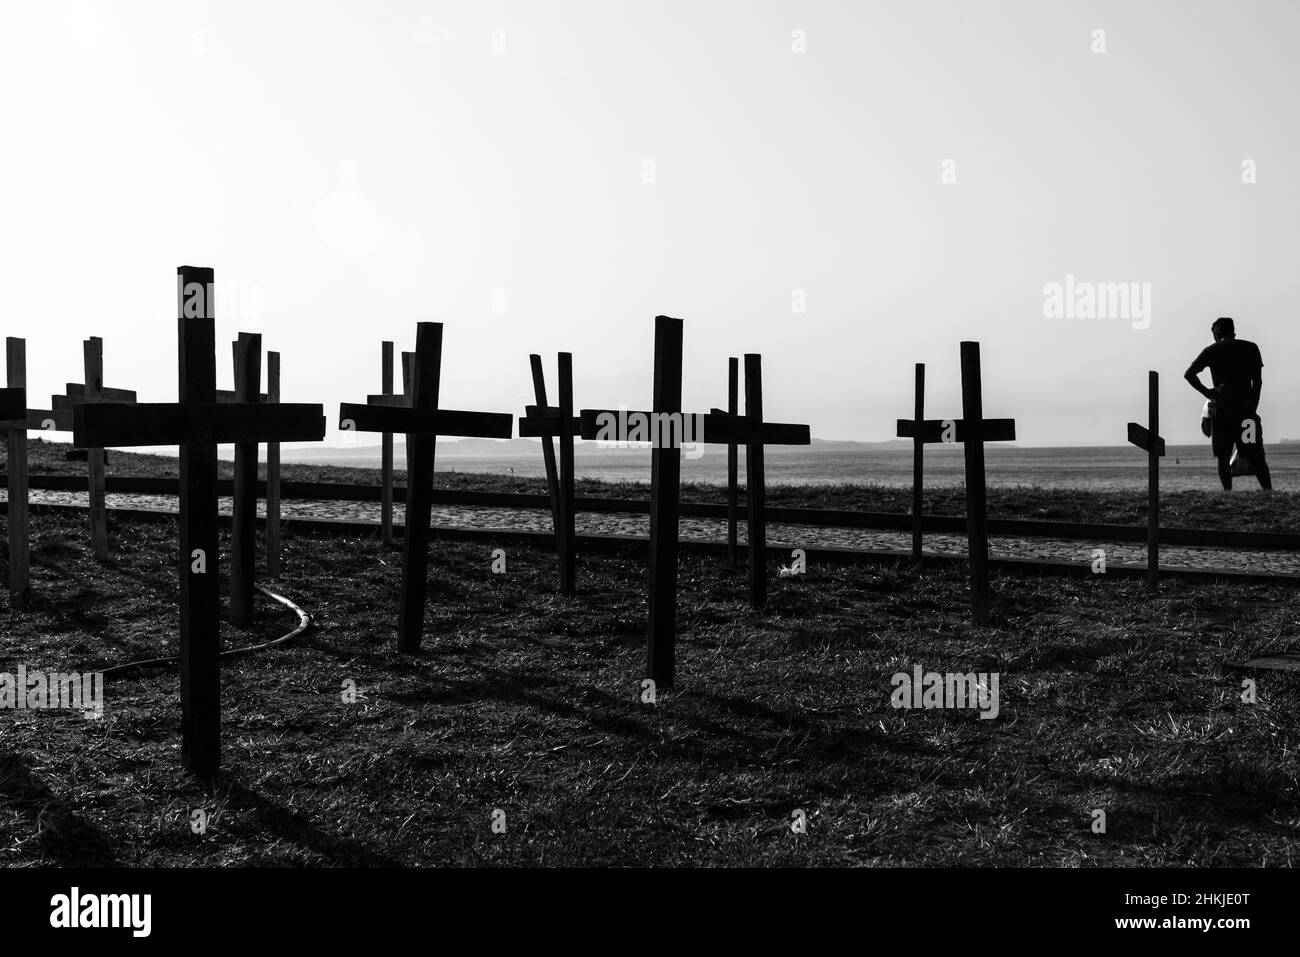 Crosses fixed to the ground in honor of those killed by Covid-19 at Farol da Barra in Salvador, Bahia, Brazil. Stock Photo